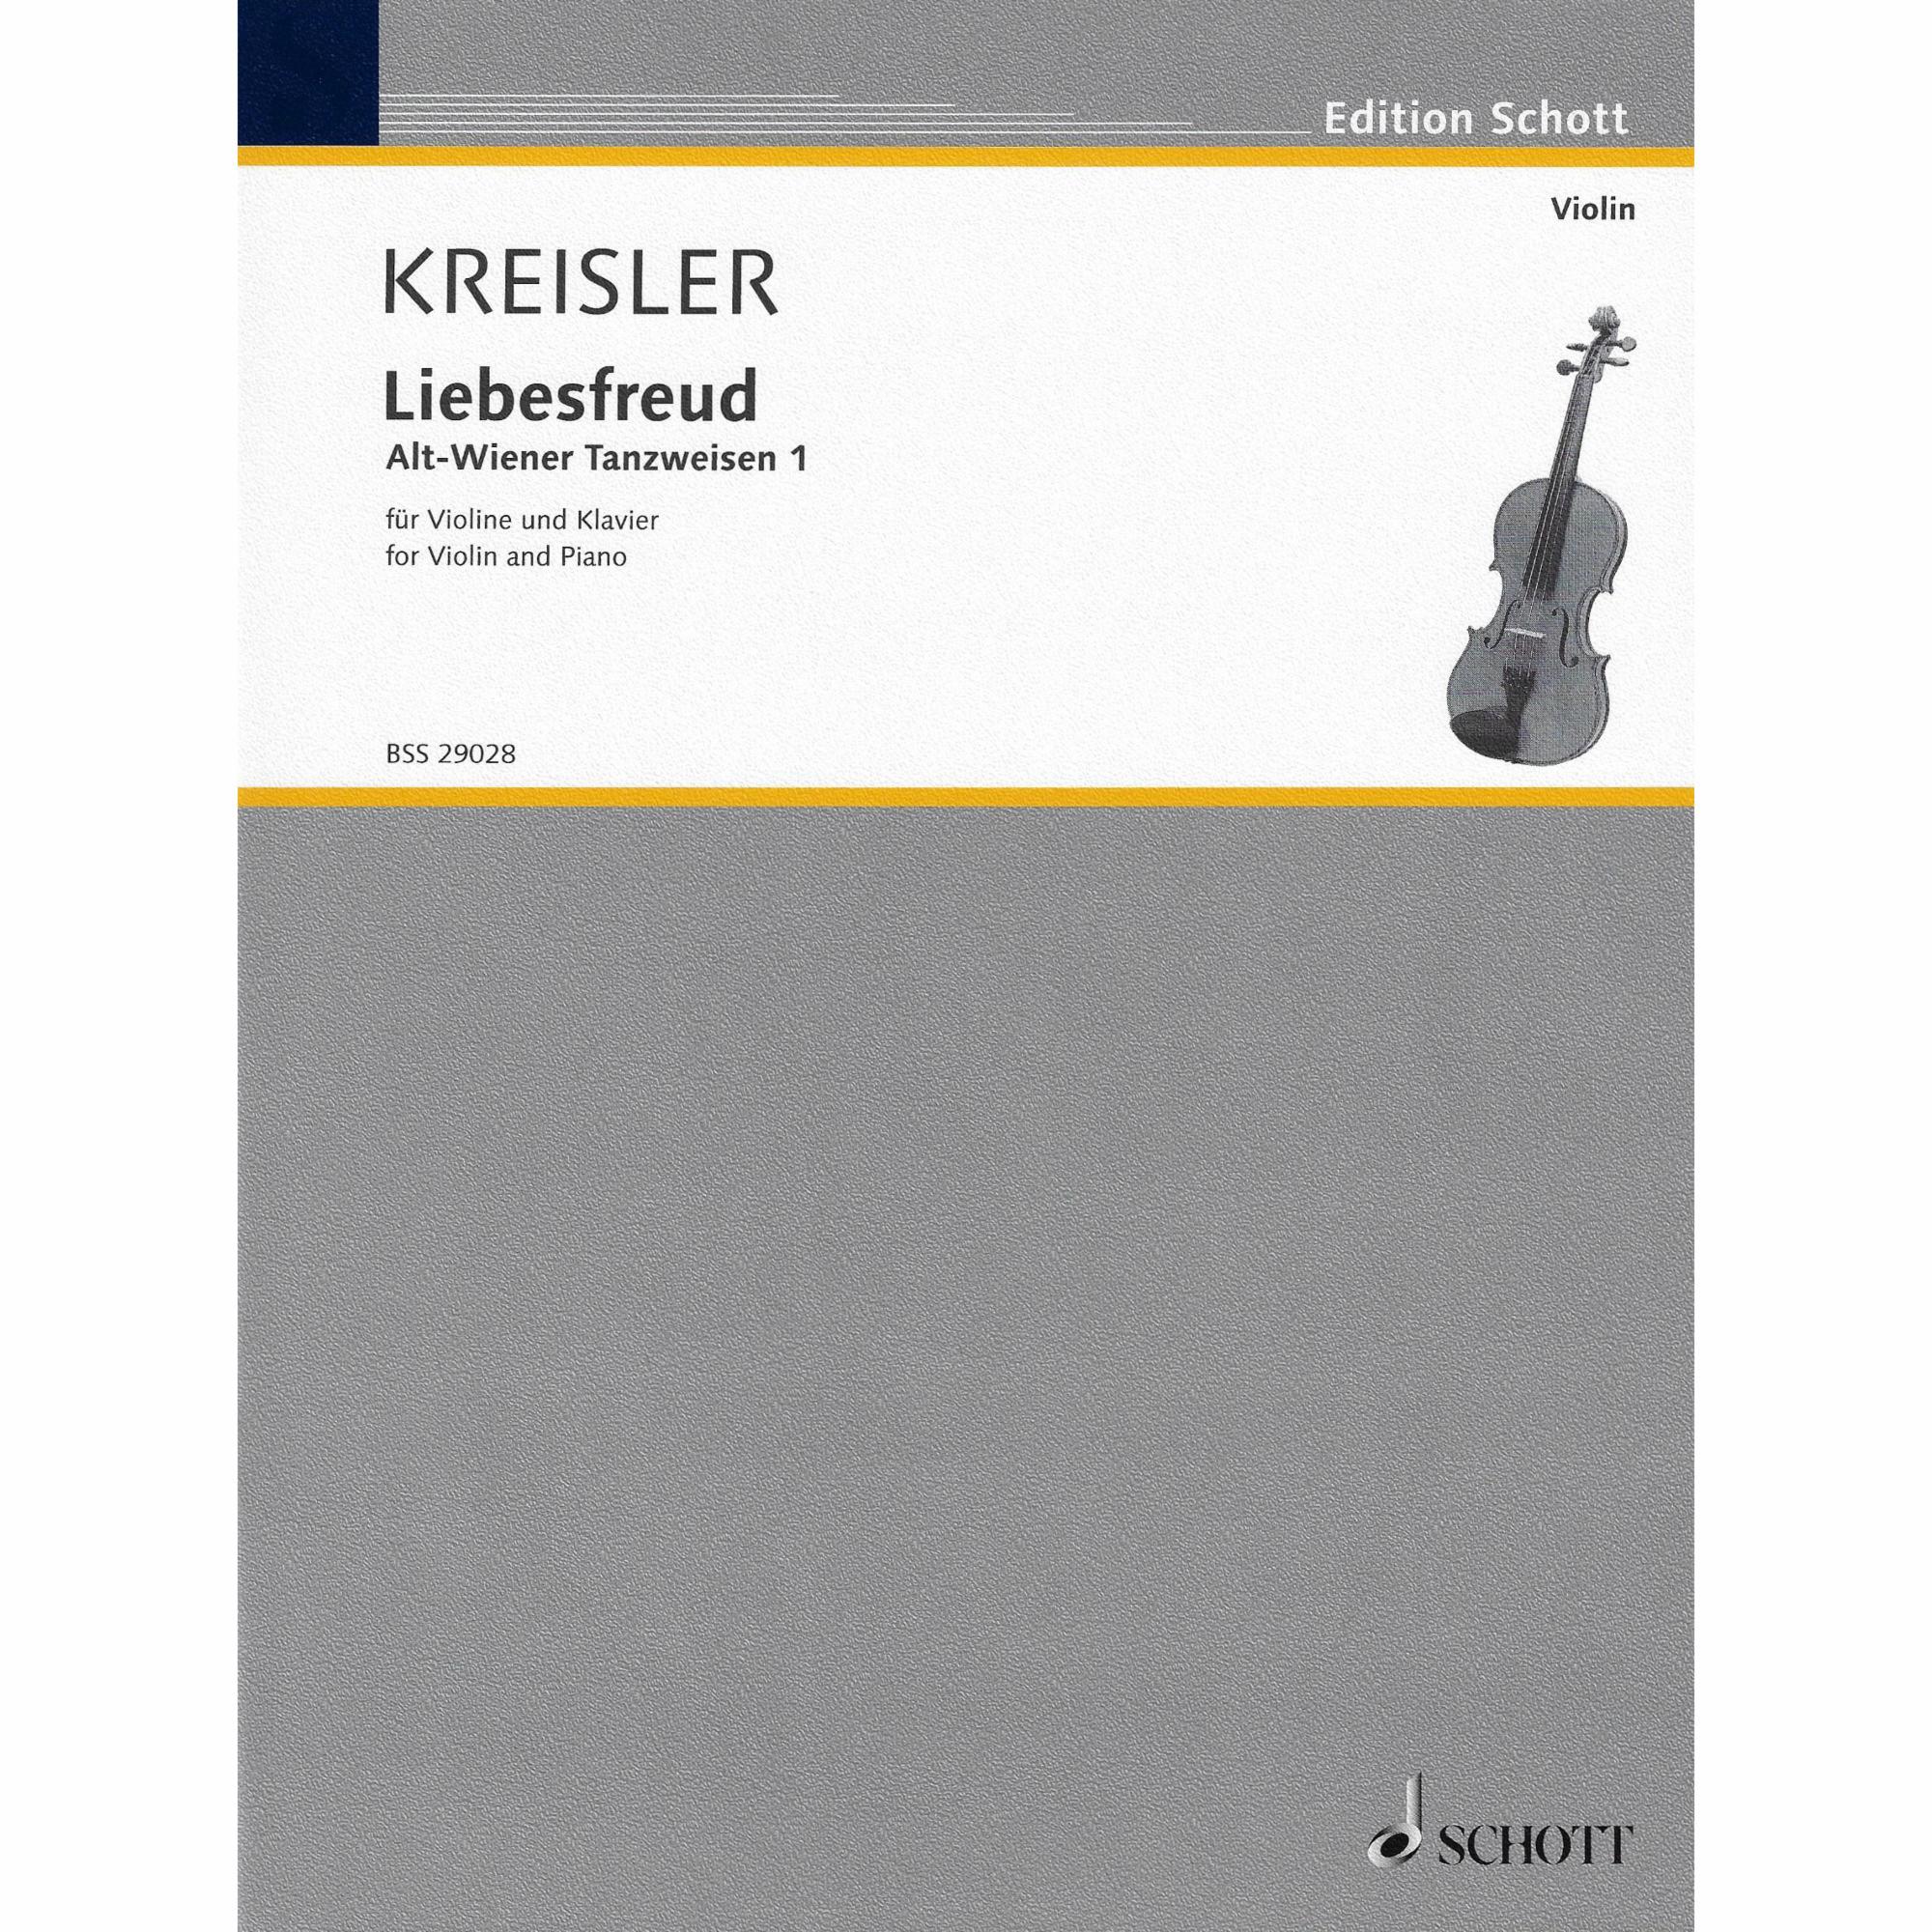 Kreisler -- Liebesfreud for Violin and Piano